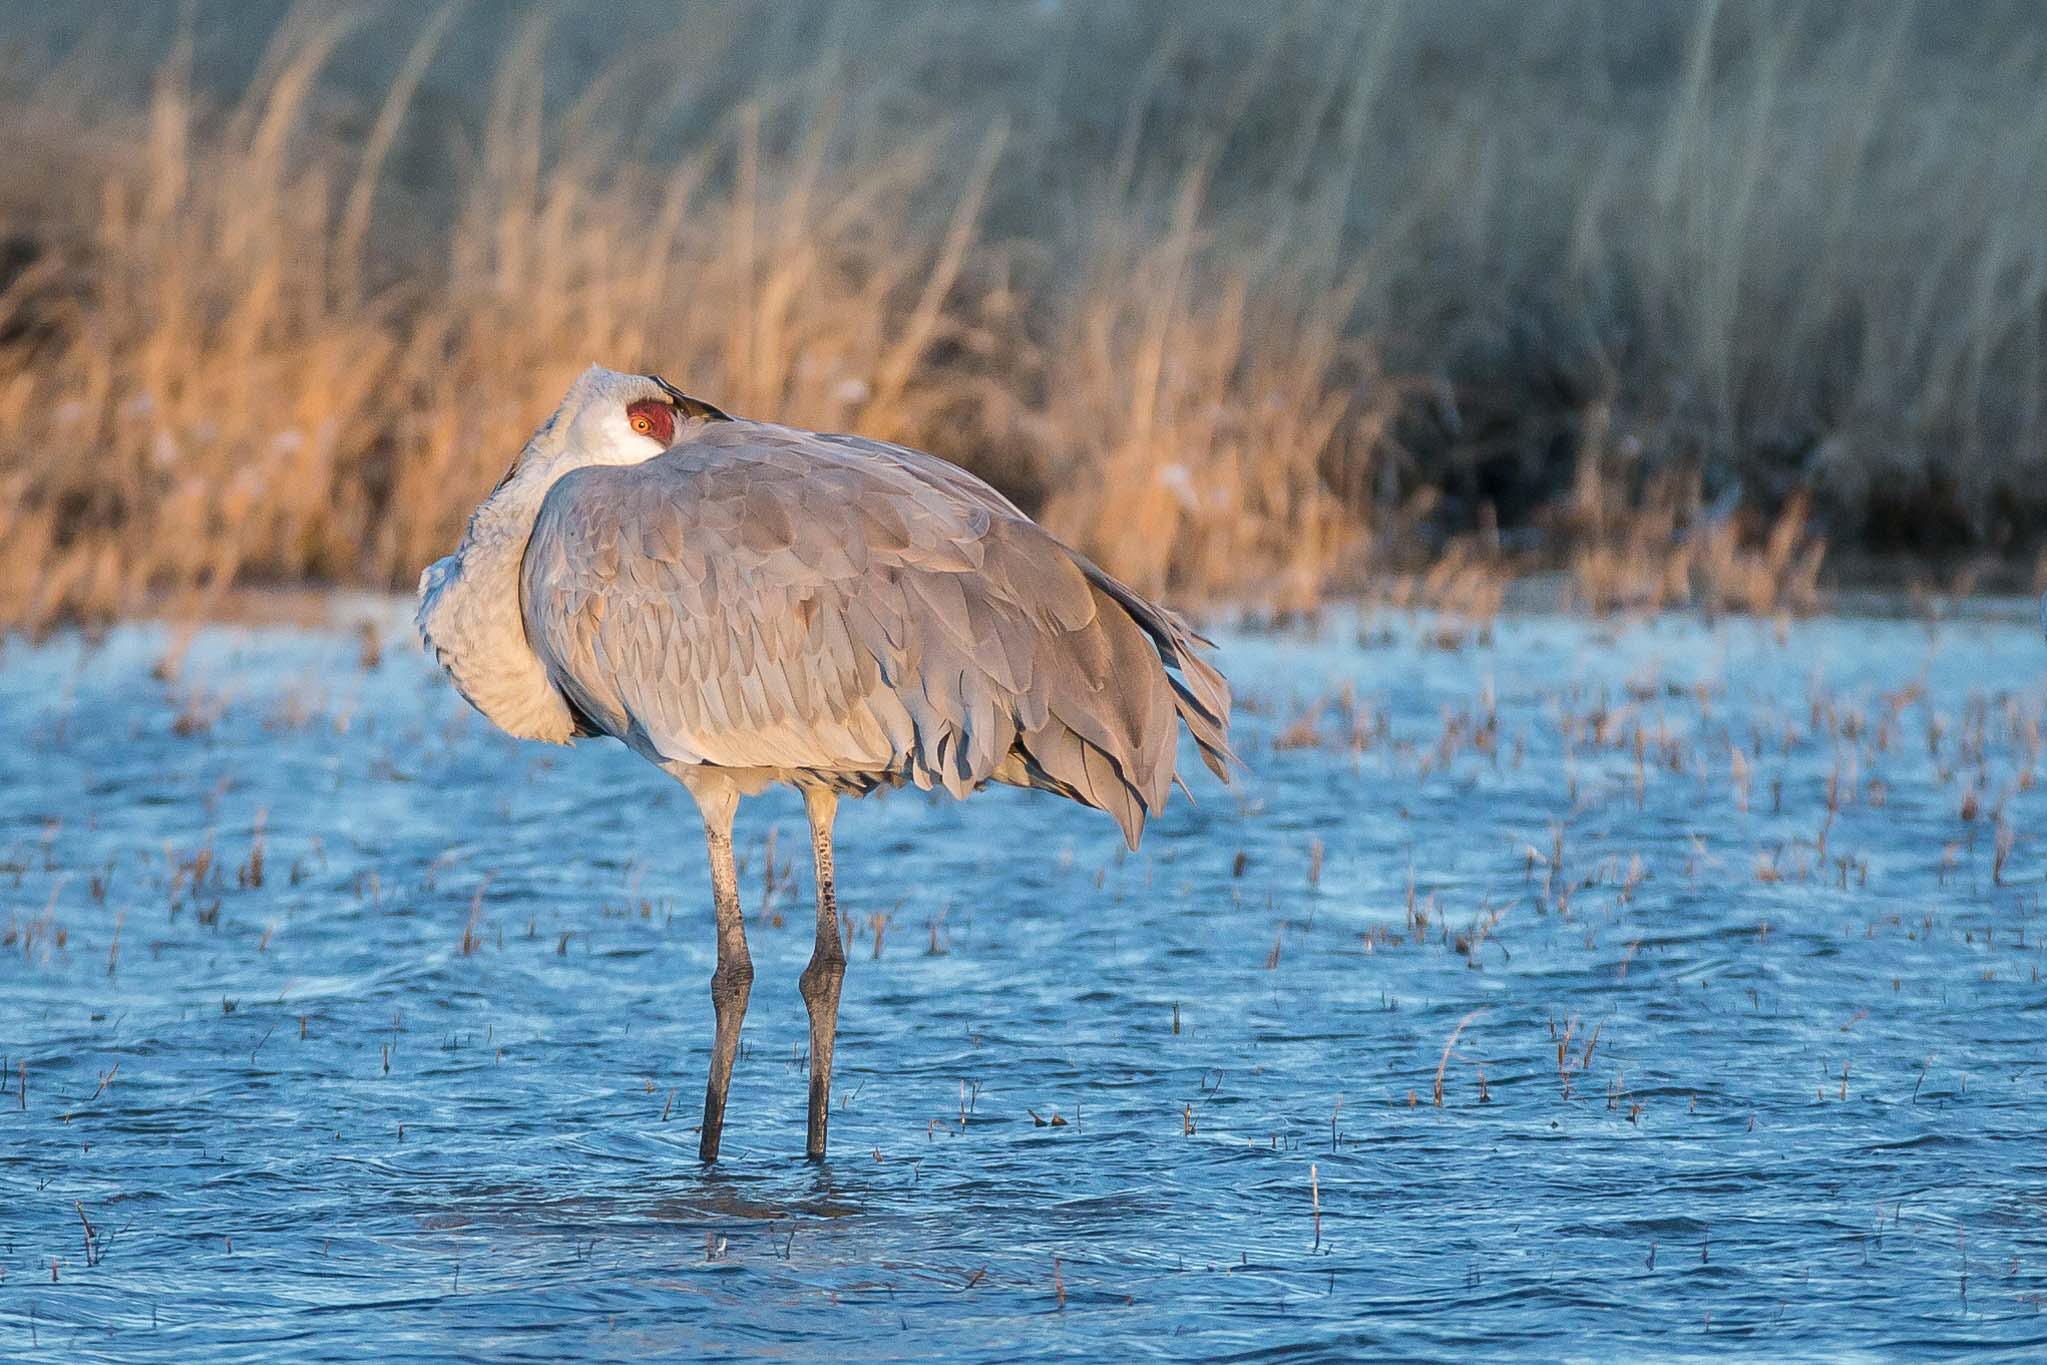 Sandhill Crane sleeping with an eye out, Bosque del Apache National Wildlife Refuge, San Antonio NM, January 24, 2017